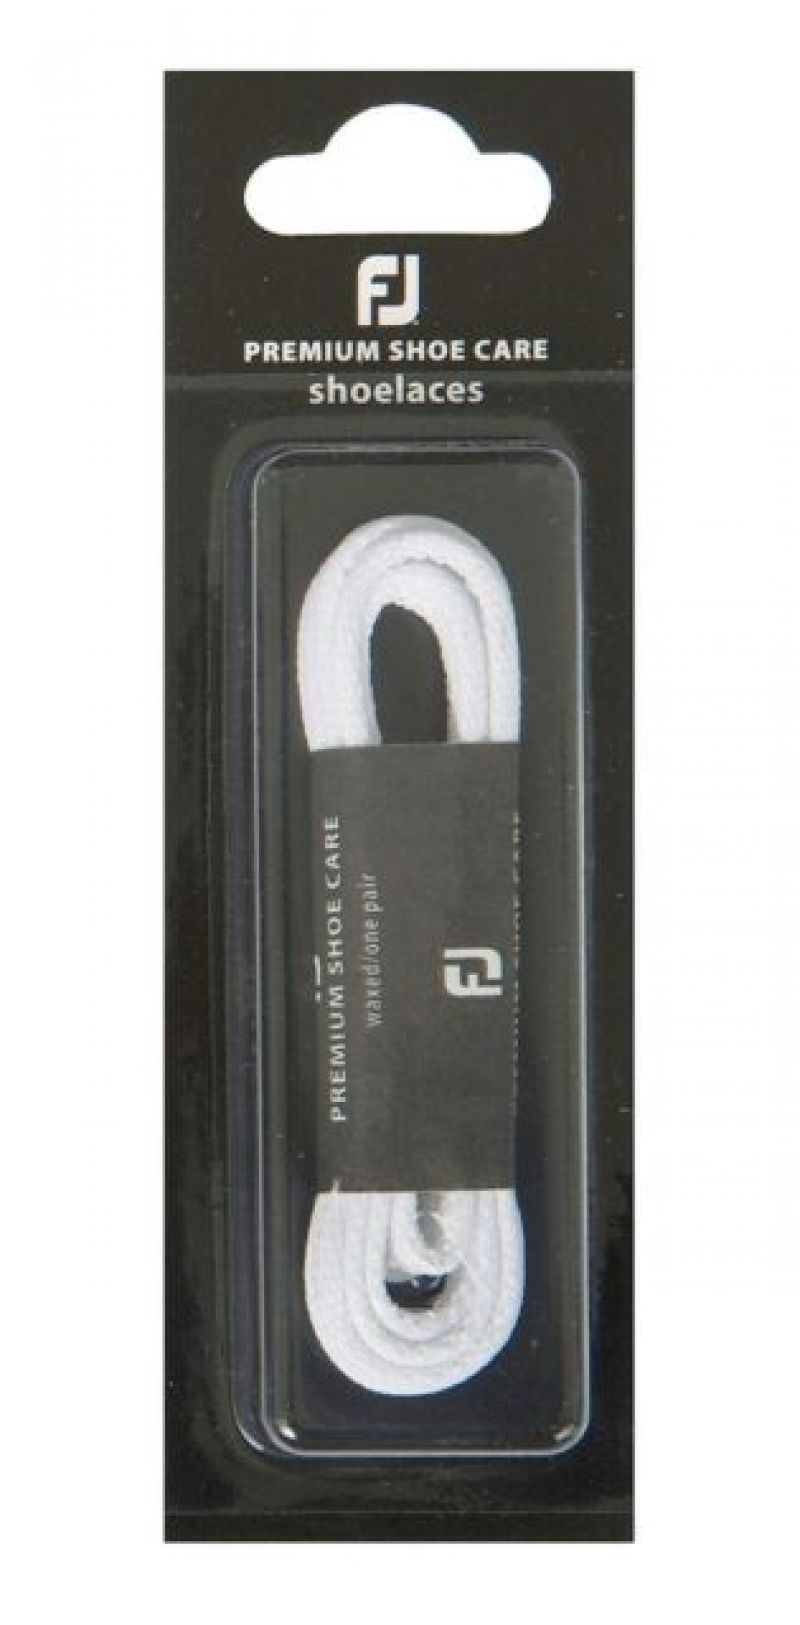 FootJoy Premium Shoelaces in Black and White Accessories | Golf Inc.